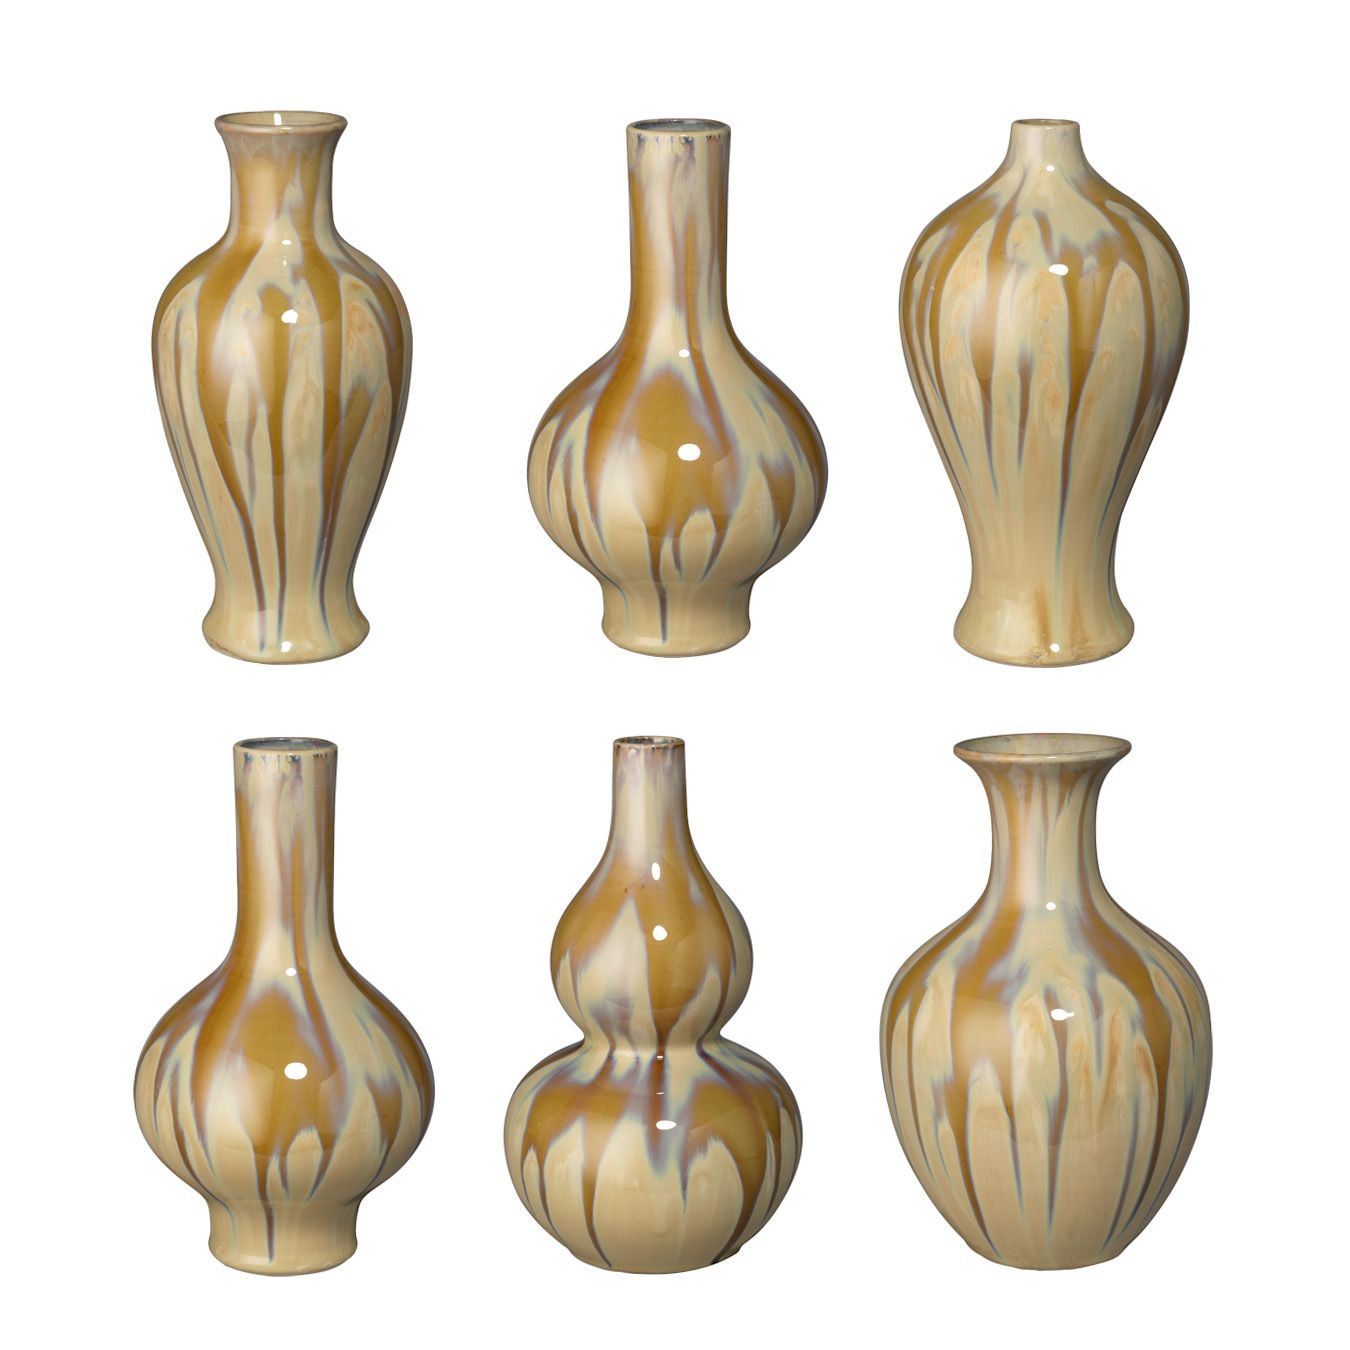 25 Fabulous Ceramic Vase Shapes 2024 free download ceramic vase shapes of jamie young zuni ceramic vases set of 6 modern furniture home with regard to jamie young zuni ceramic vases set of 6 modern furniture home decor